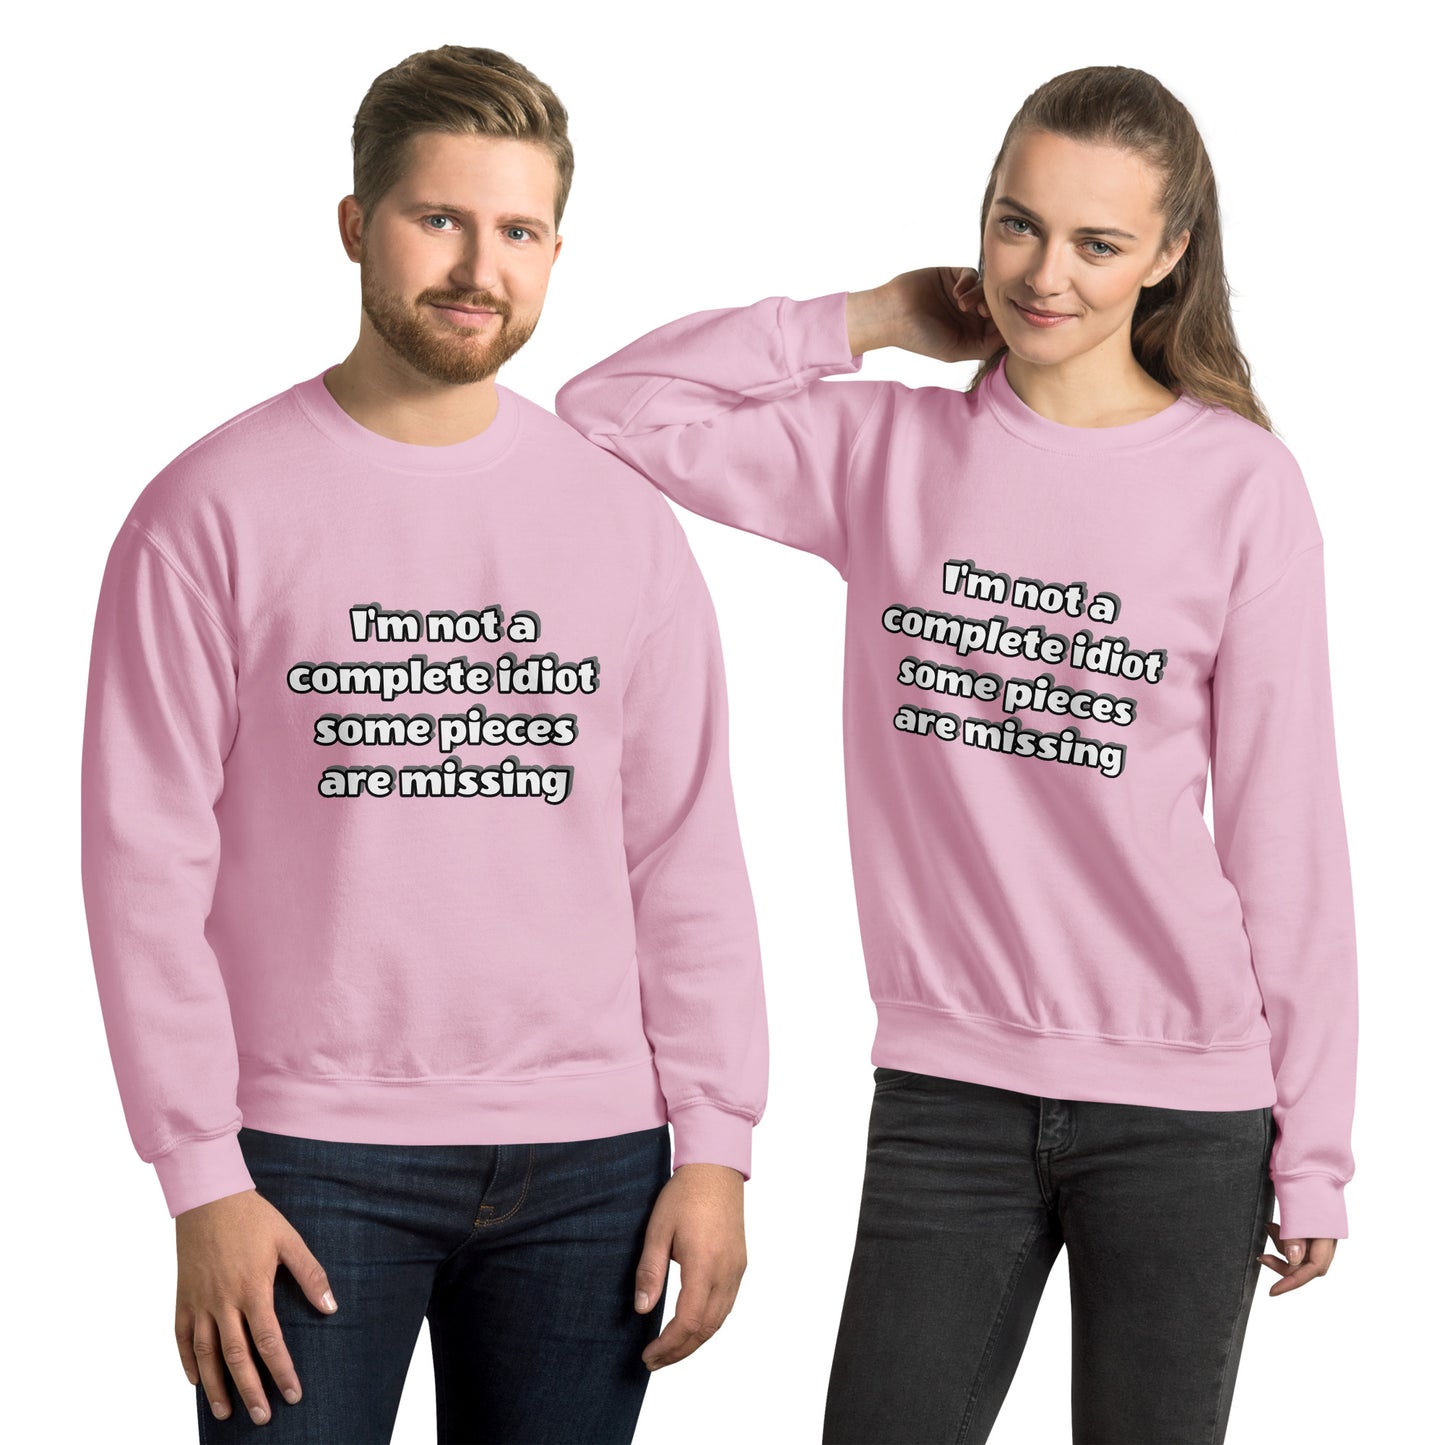 Man and women with pink sweatshirt with text “I’m not a complete idiot, some pieces are missing”